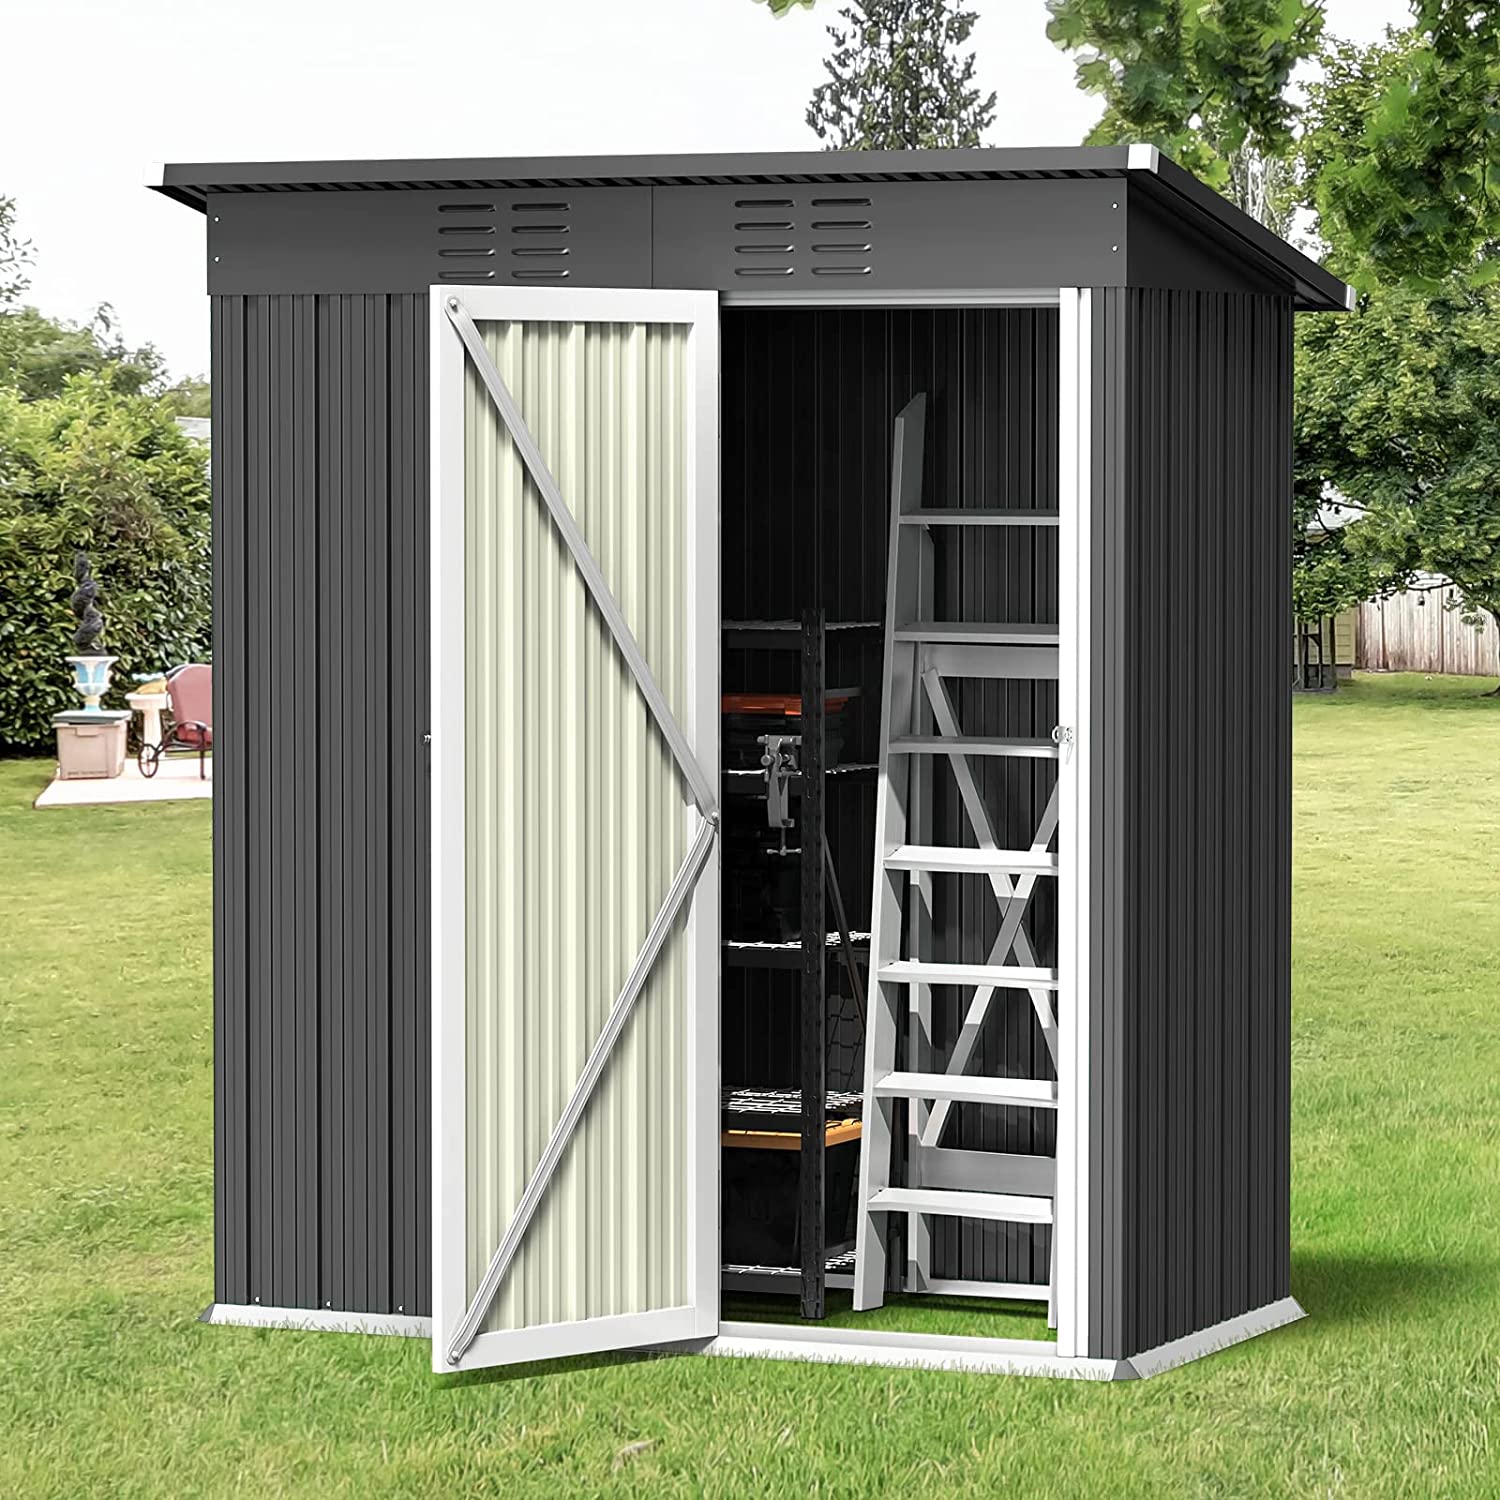 5' x 3' Outdoor Storage Shed, Metal Outdoor Storage Cabinet with Single Lockable Door, Waterproof Tool Shed,Gray - image 1 of 8